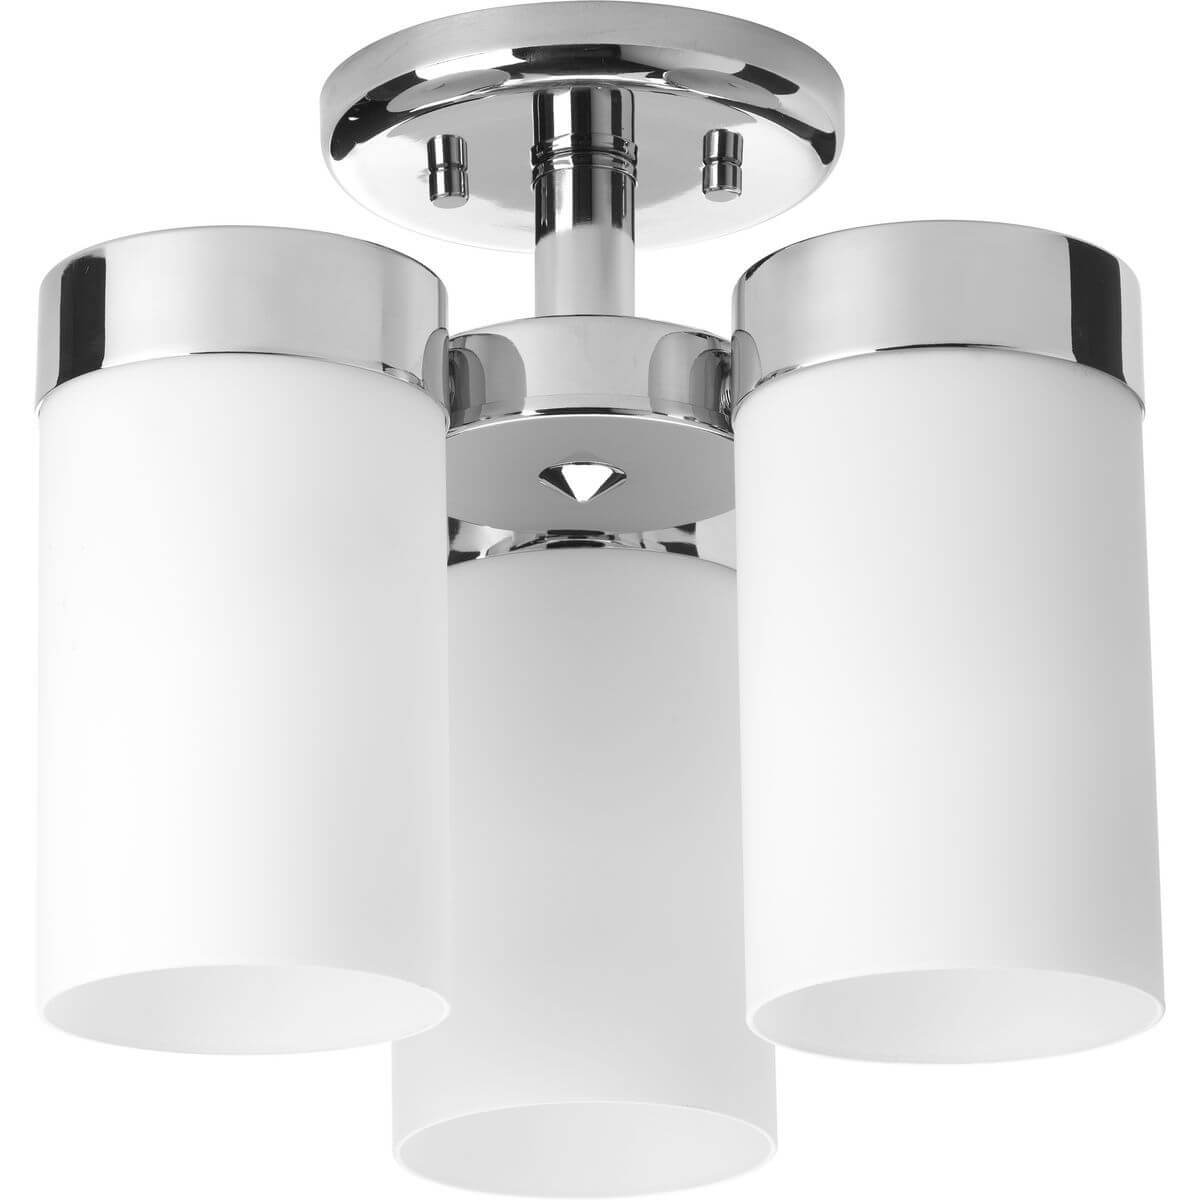 Progress Lighting Elevate 3 Light 12 Inch Flush Mount In Polished Chrome With Etched White Glass P350040-015